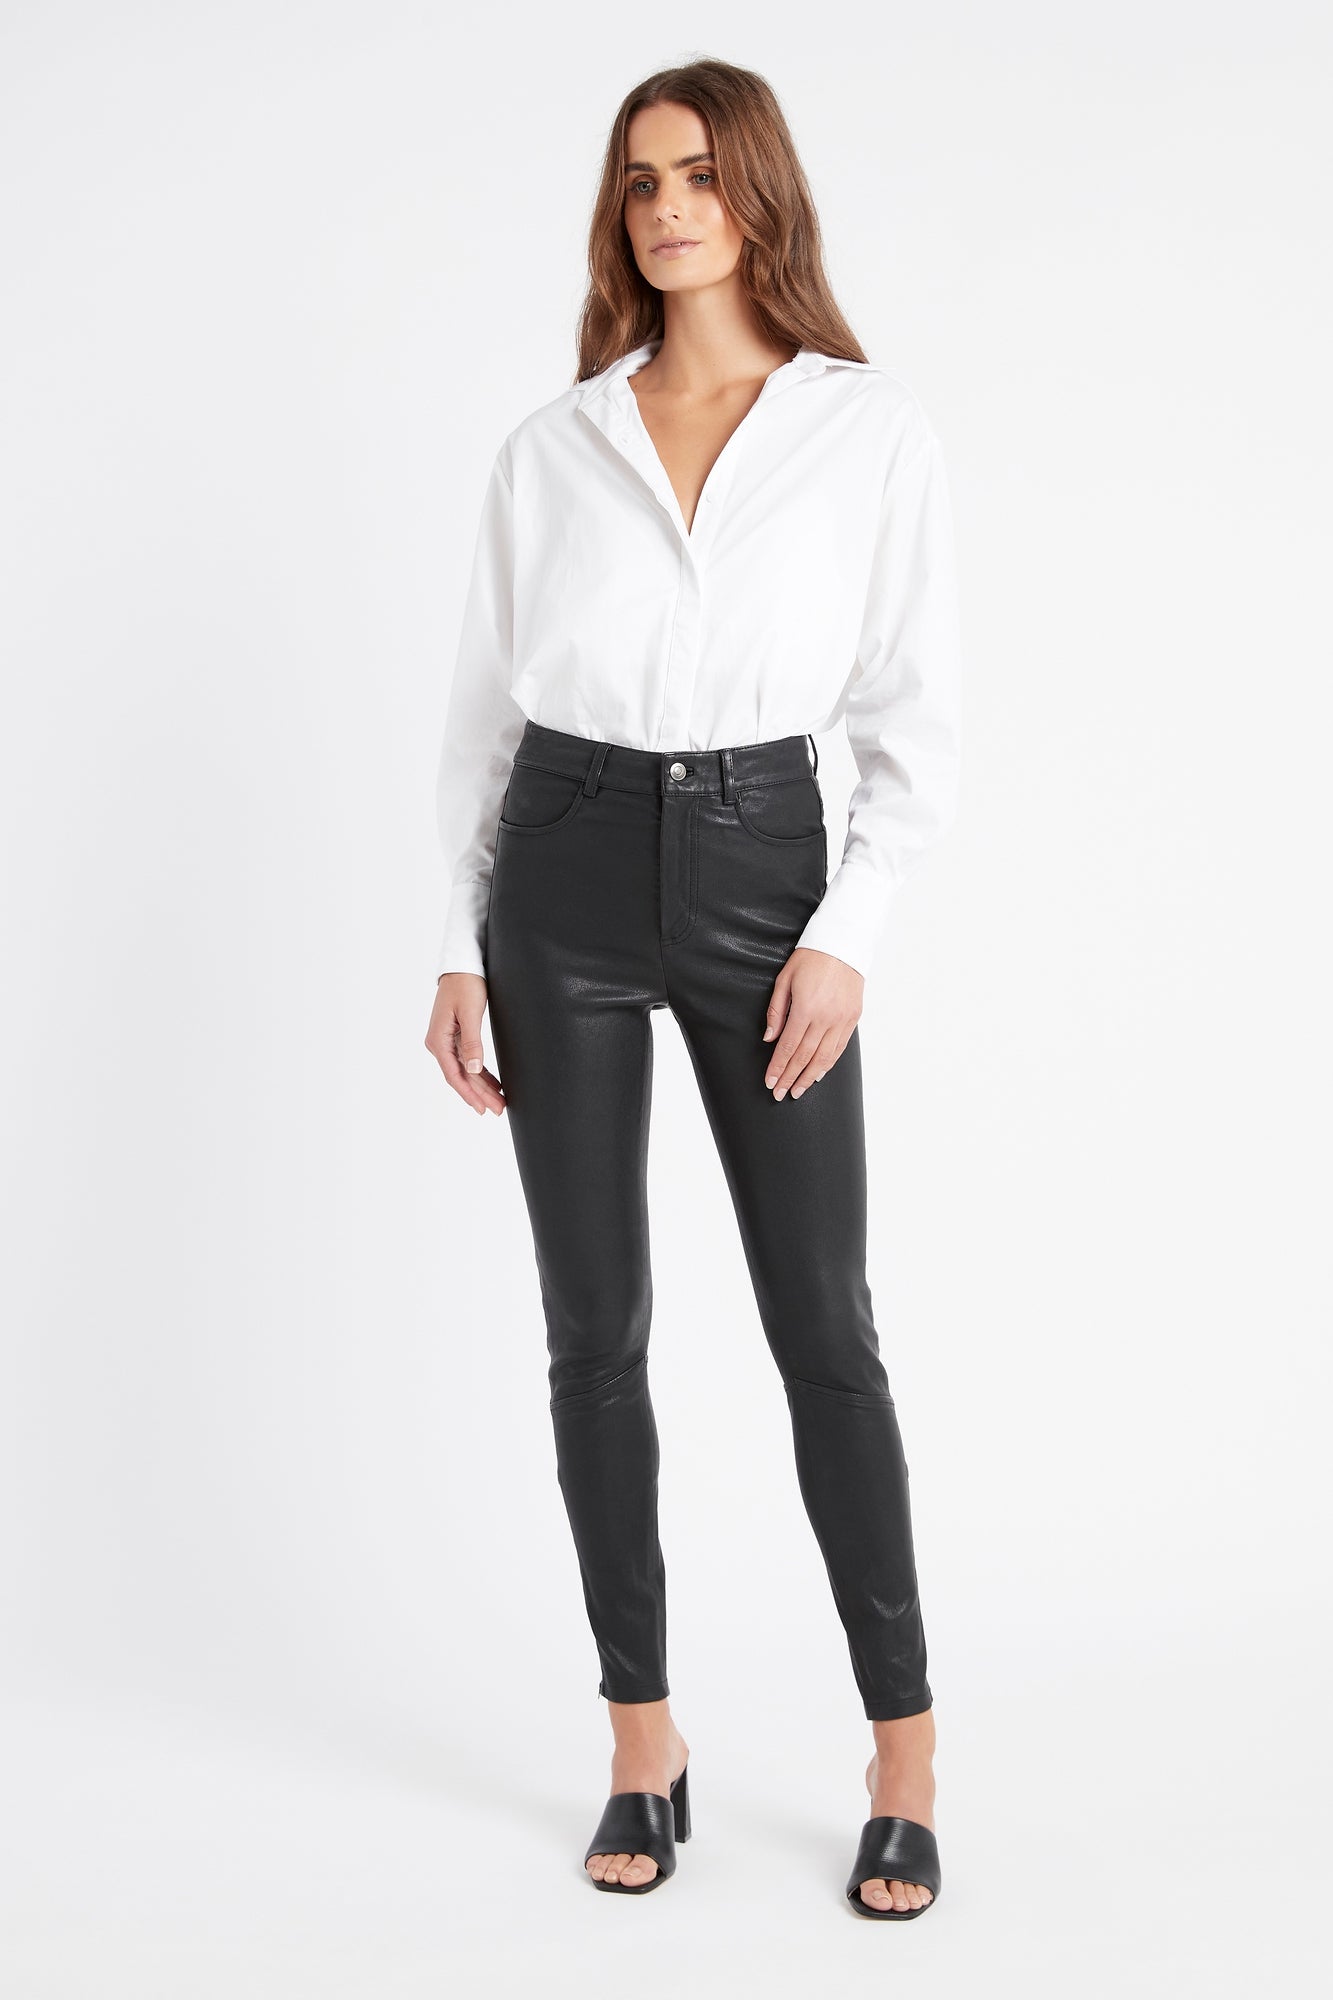 Womens Leather Trousers  Explore our New Arrivals  ZARA Australia